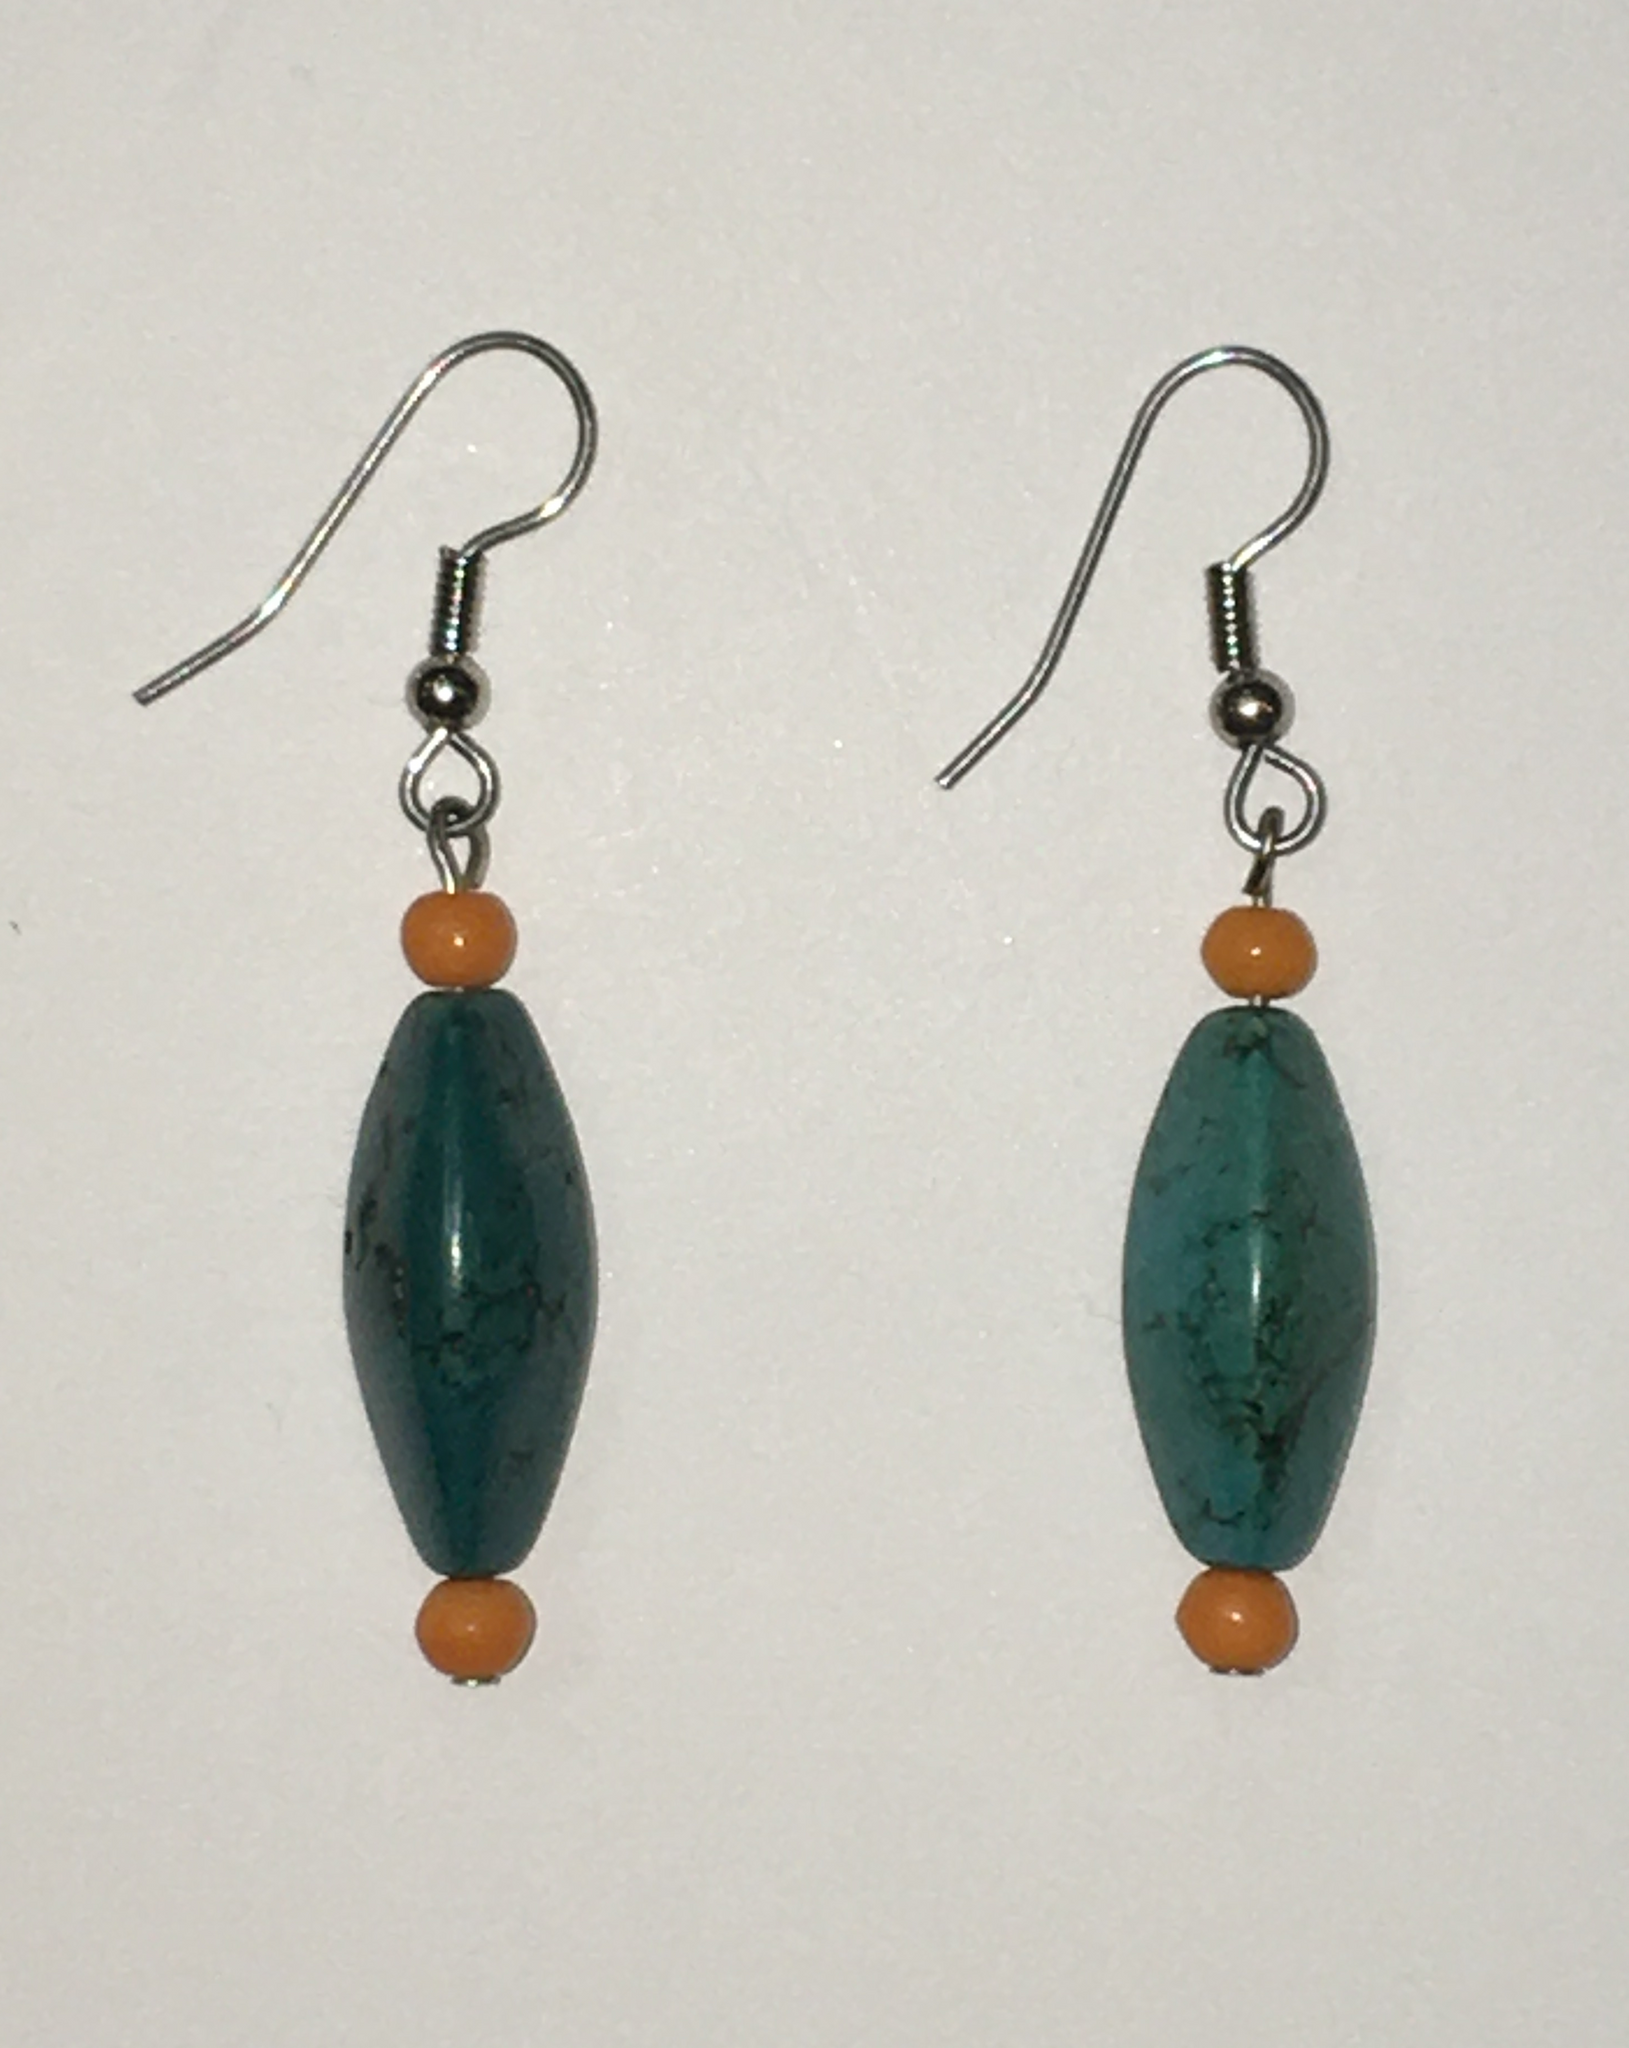 Turquoise Drop Earrings with Orange Bead Accents